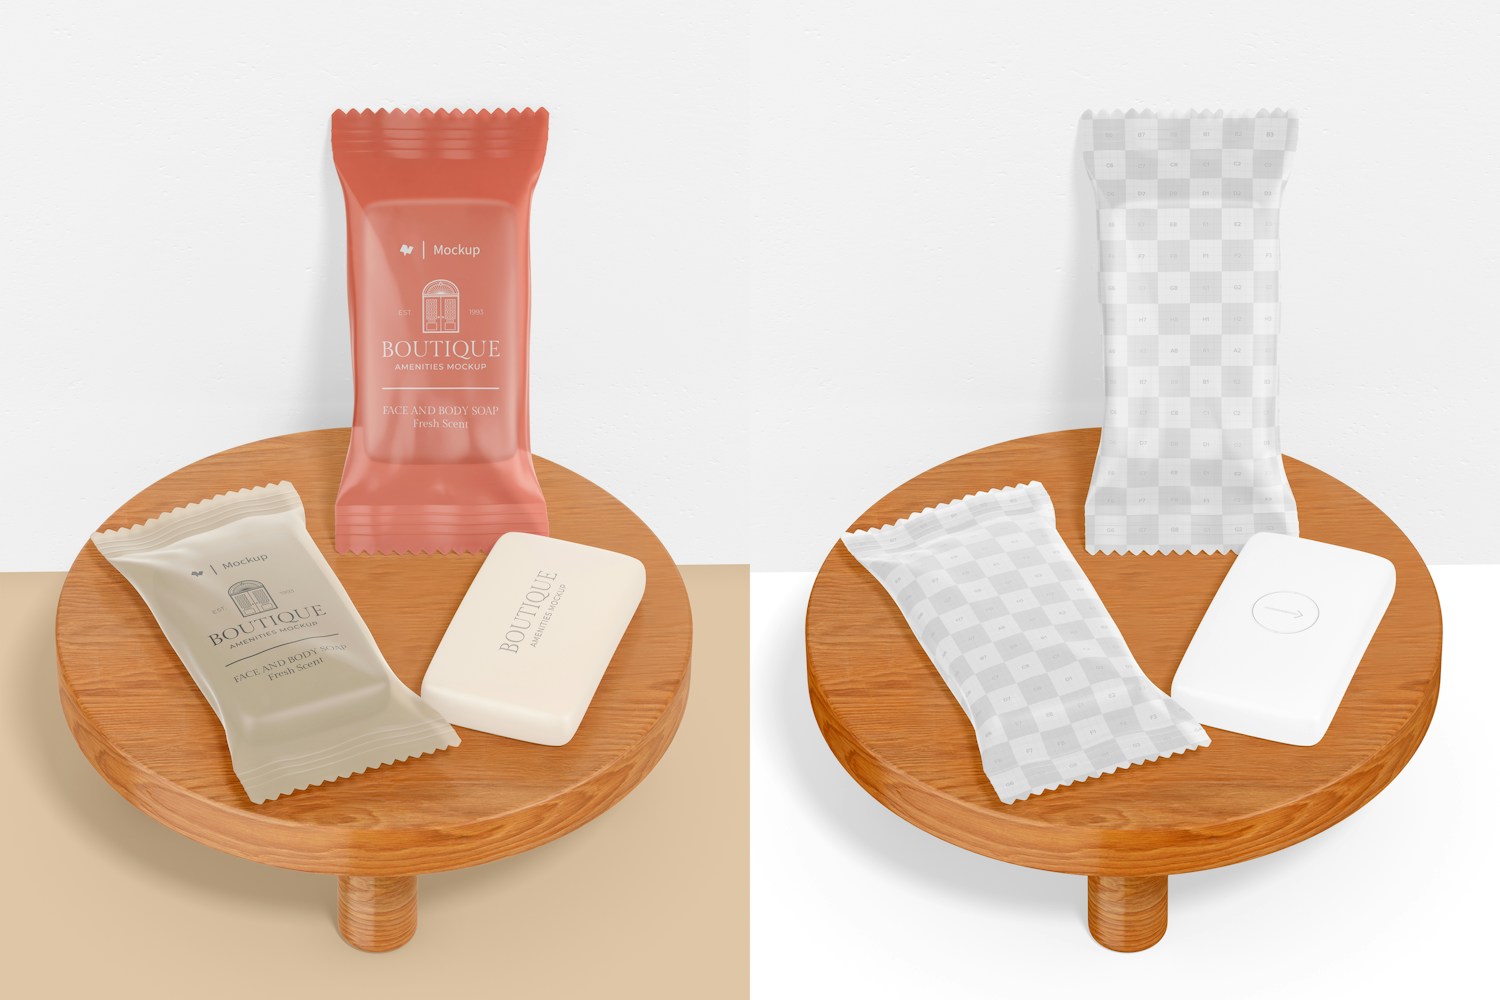 Rectangular Soap Bags Mockup, on Surface